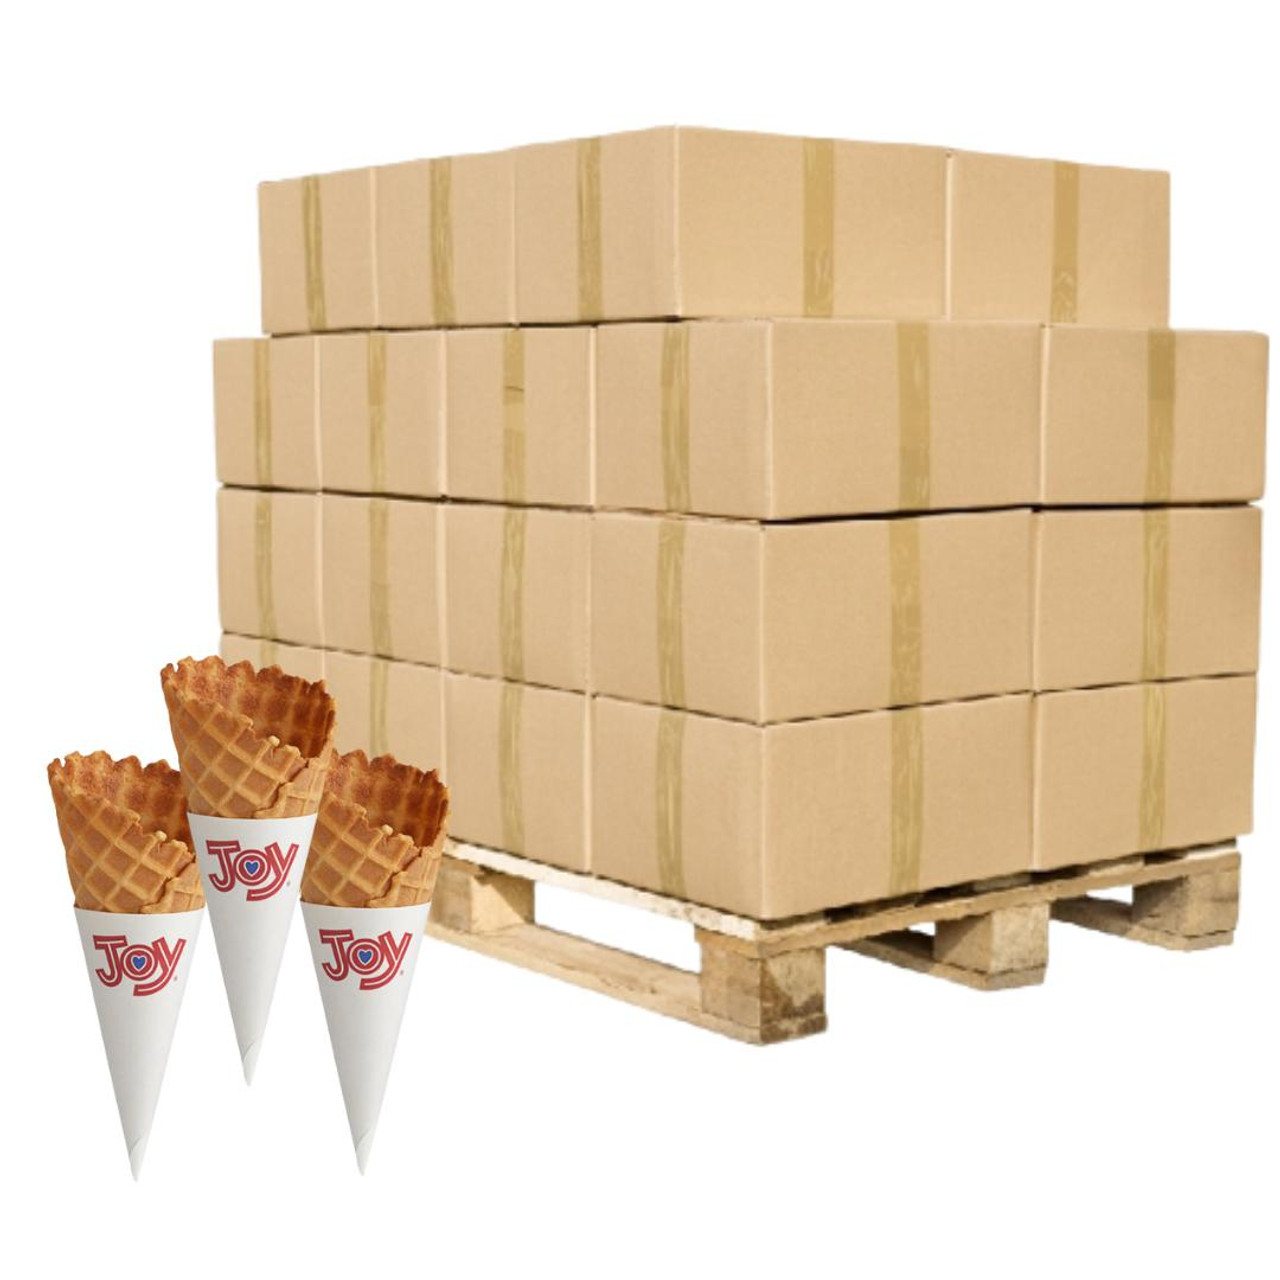  JOY Small Jacketed Waffle Cone - 276/Case | 16 Cases Per Pallet | 4416 CONES 